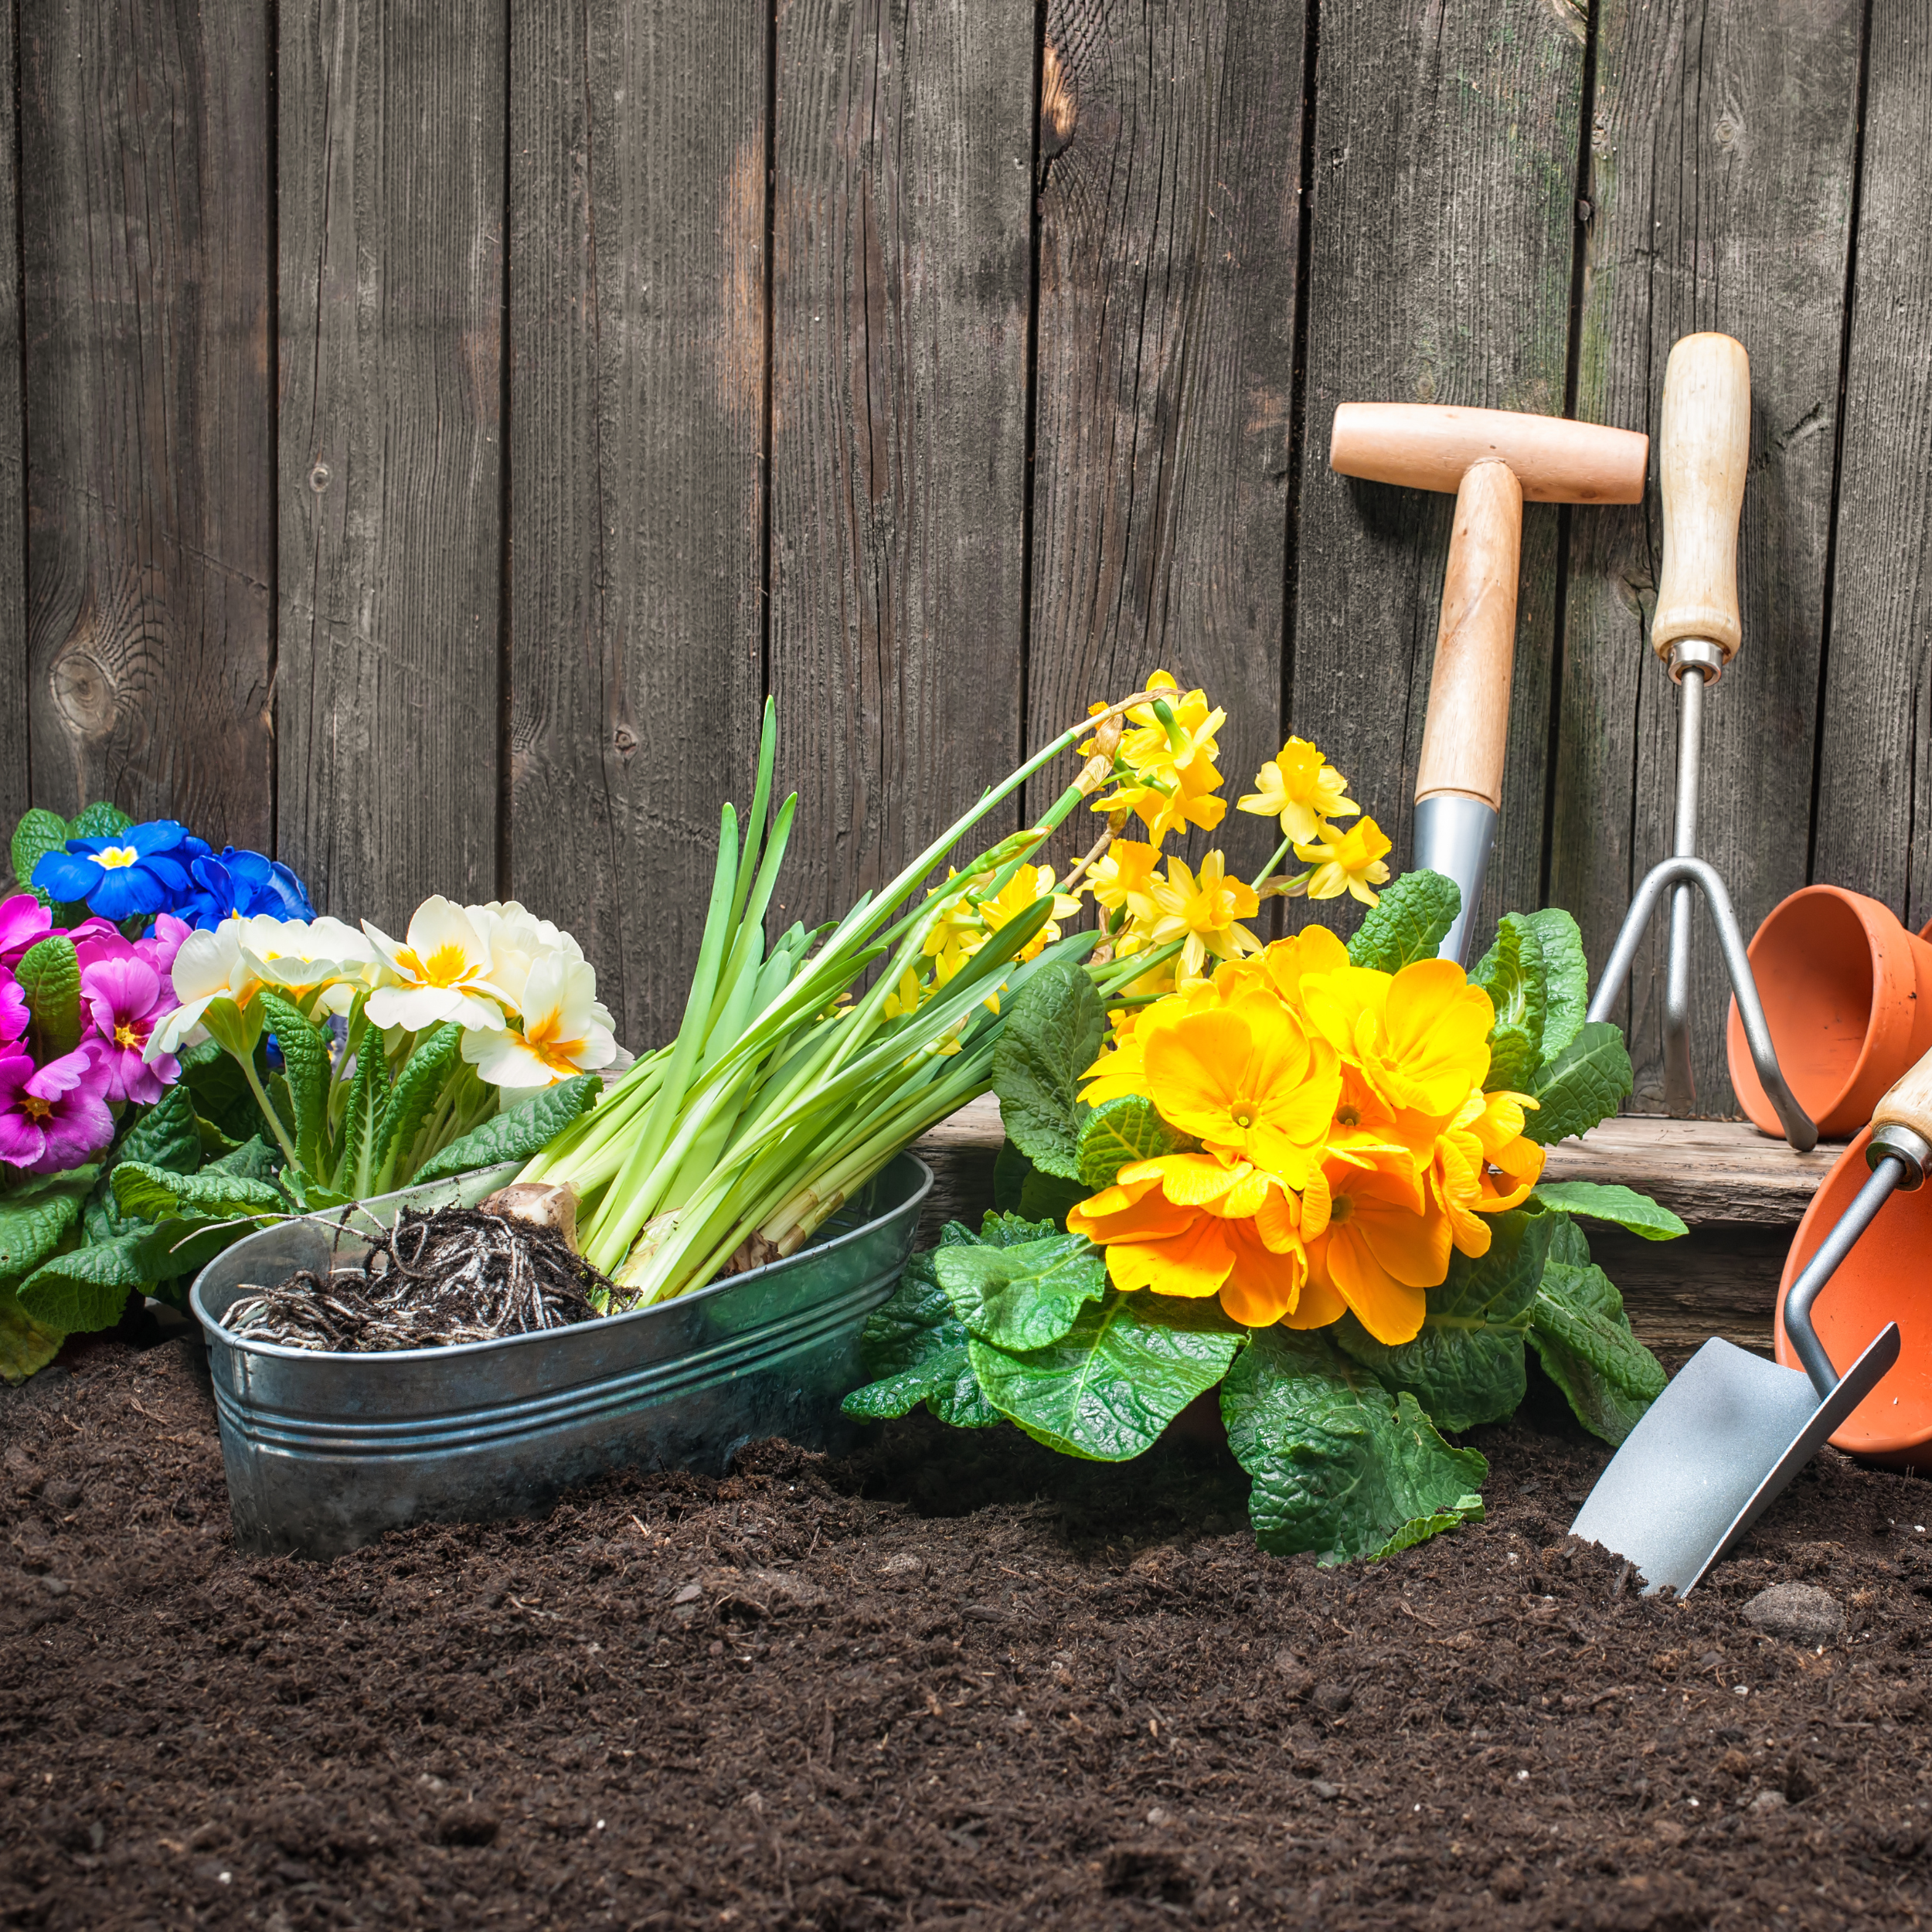 Gardening Default Image: a photograph of gardening tools, soil, flowers, and vegetables